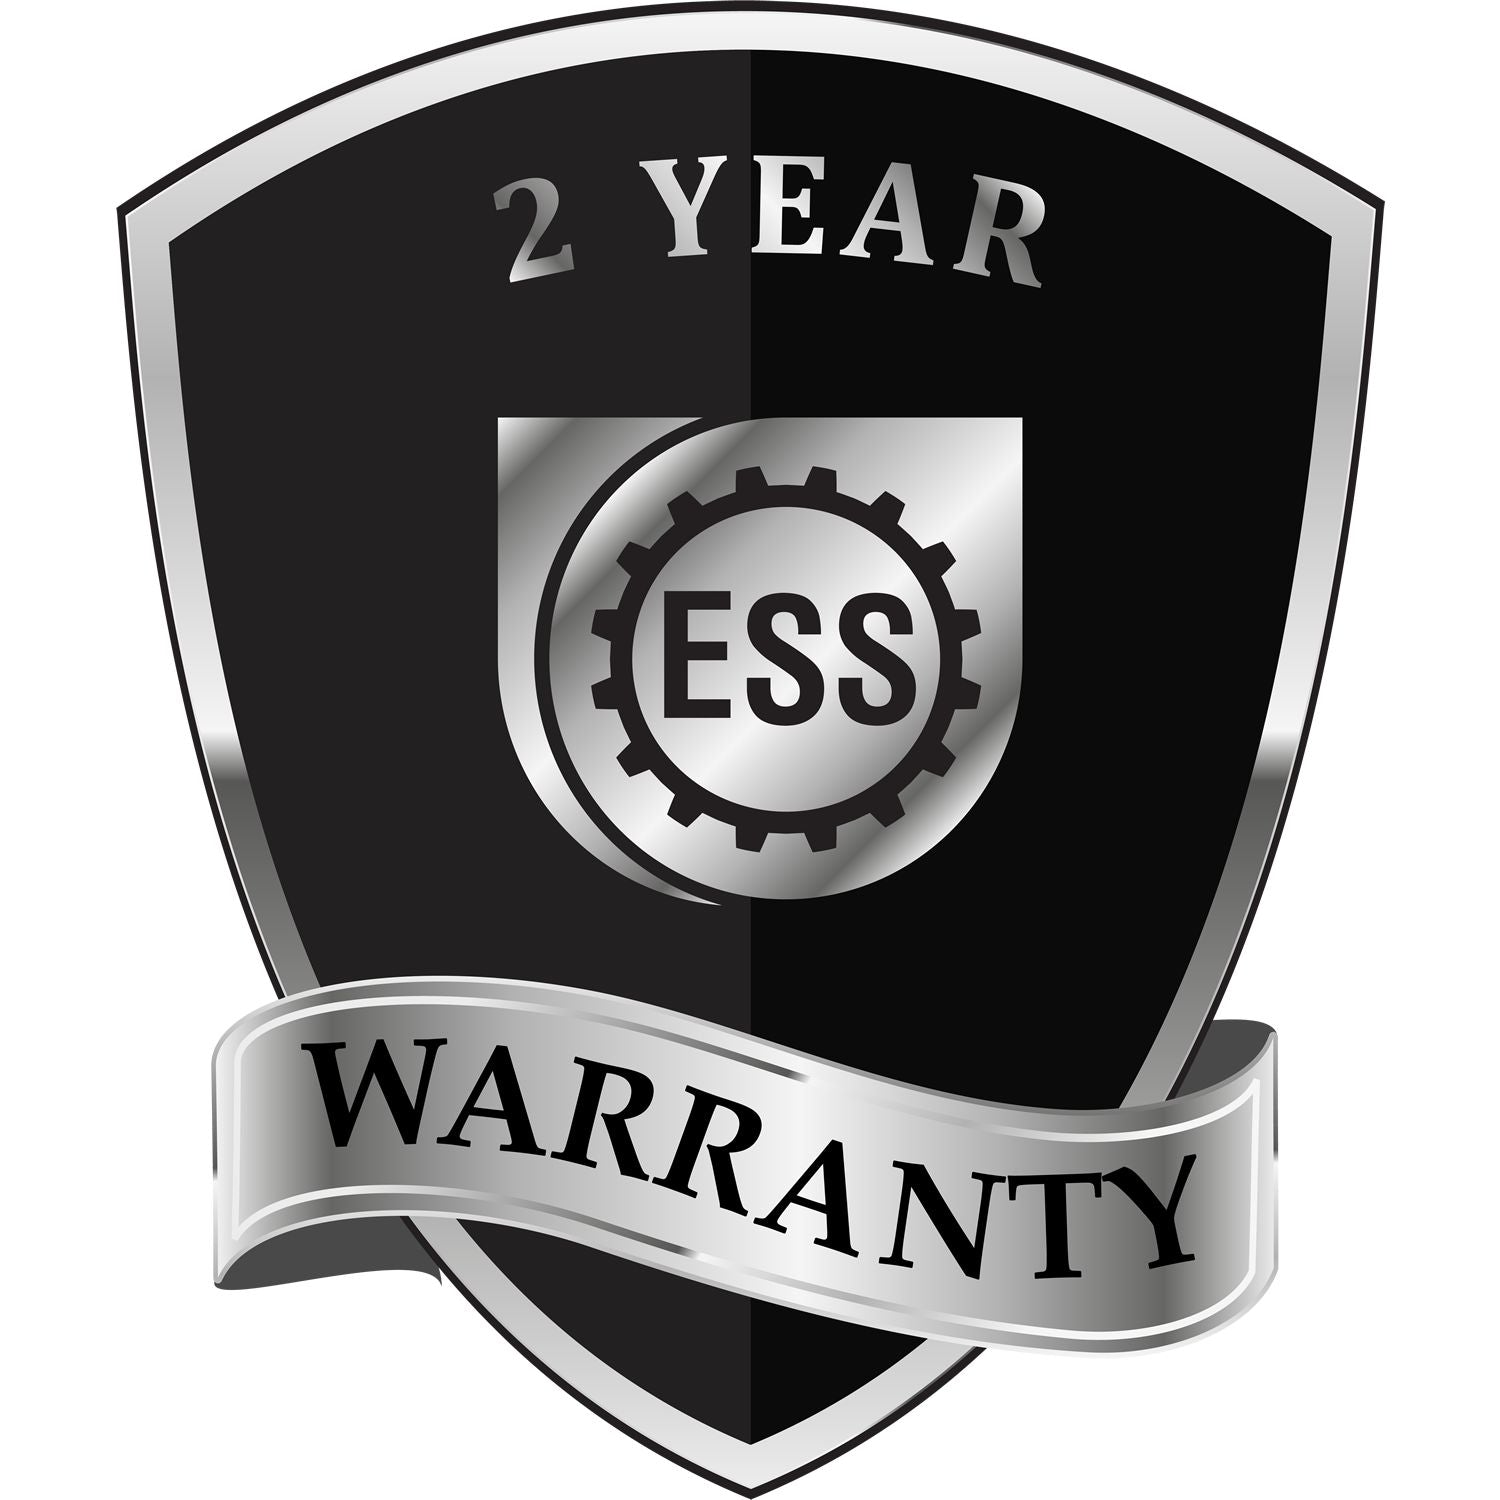 A black and silver badge or emblem showing warranty information for the Soft South Dakota Professional Geologist Seal